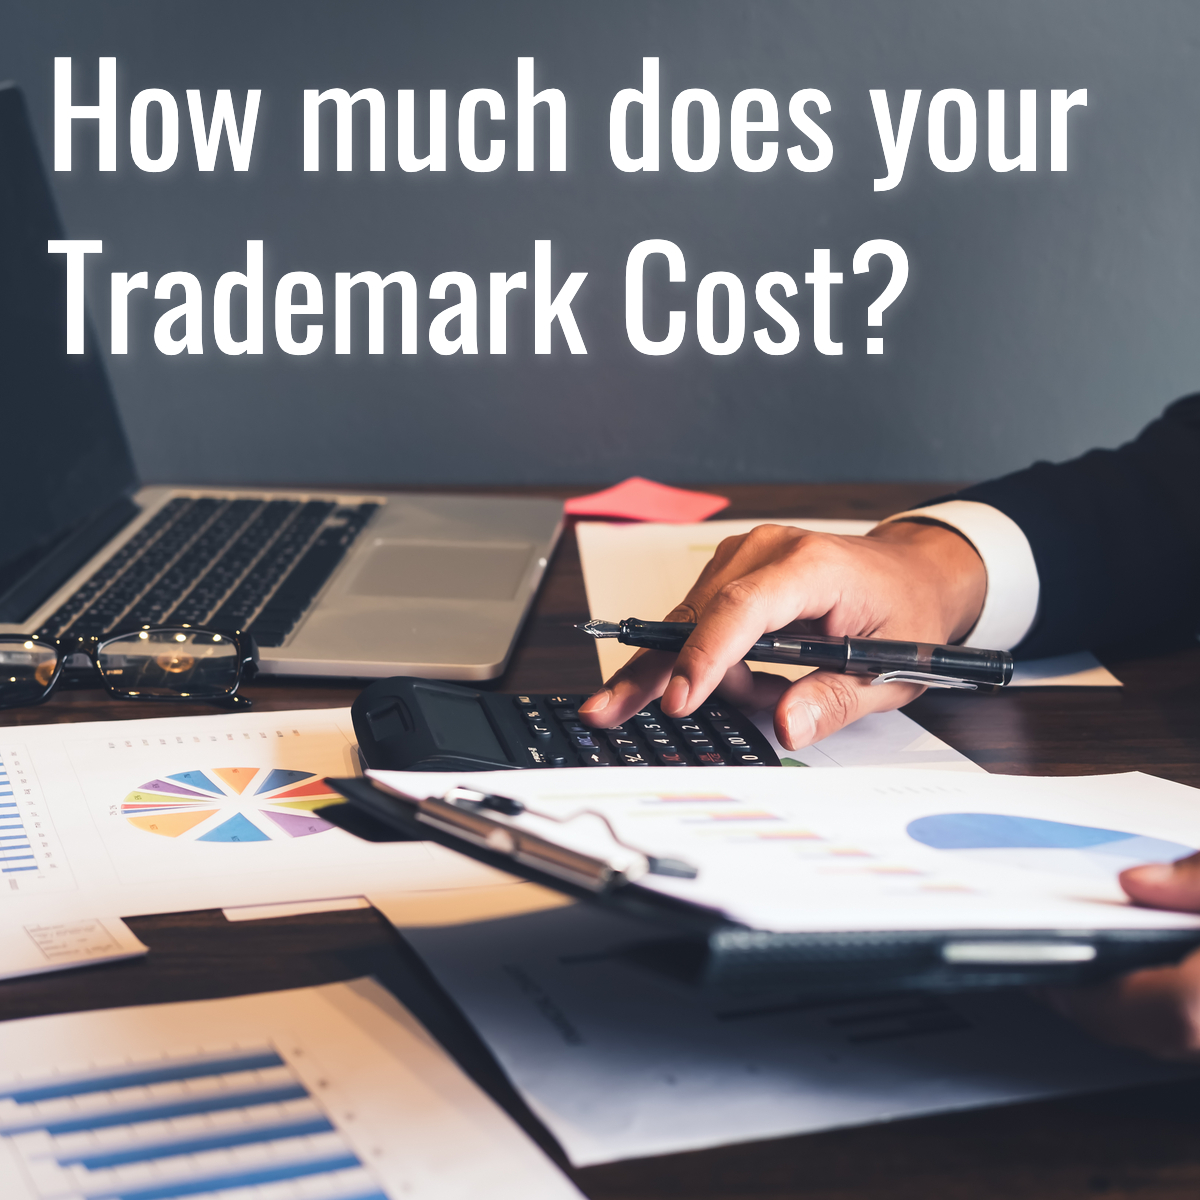 How much does your trademark cost?